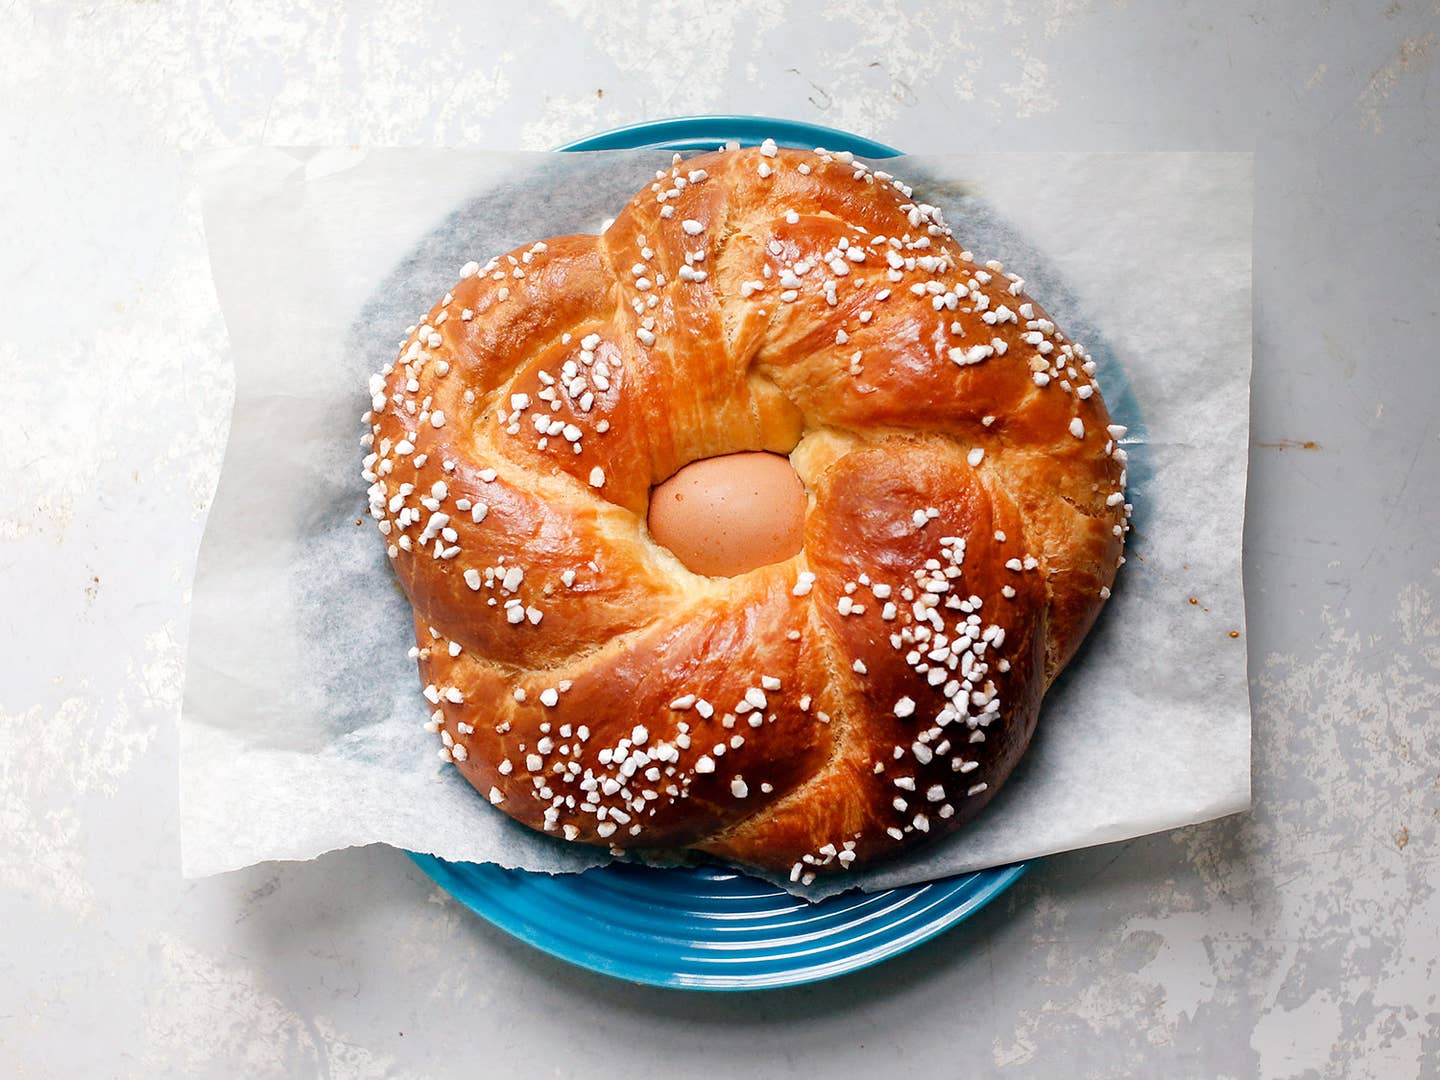 Master Easter Bread with This Step-by-Step Guide